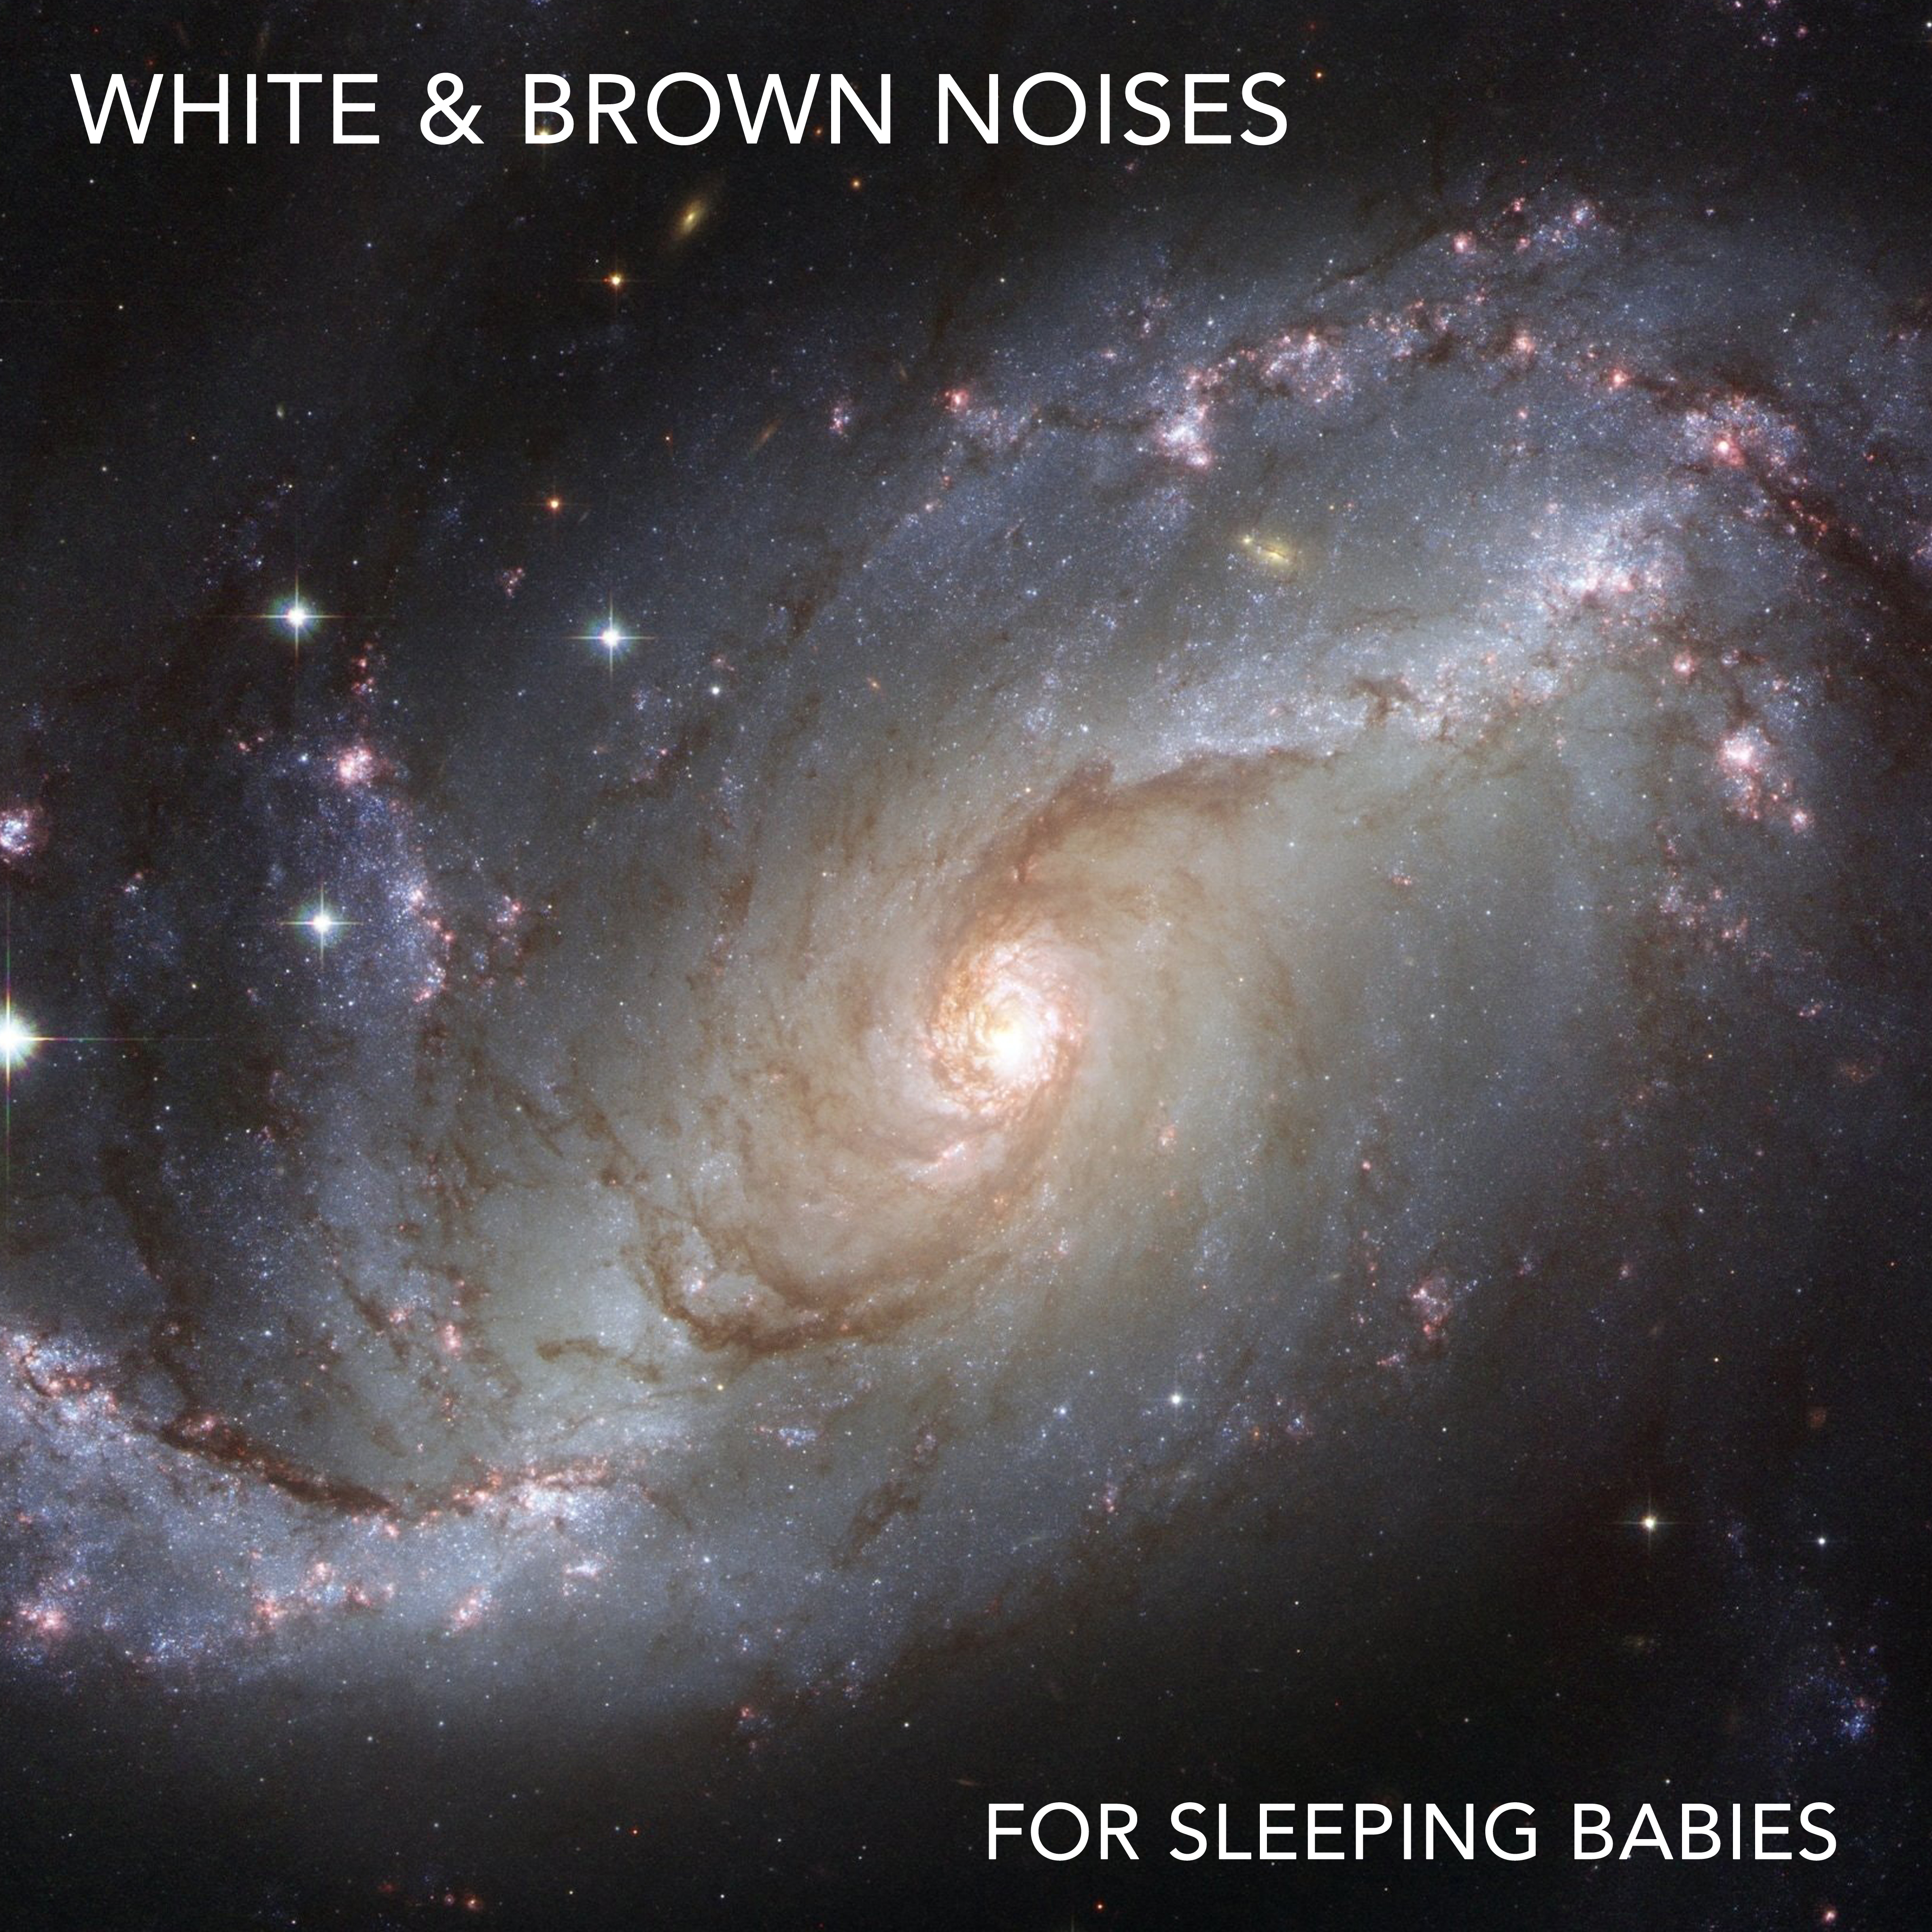 18 White & Brown Noises for Sleeping Babies